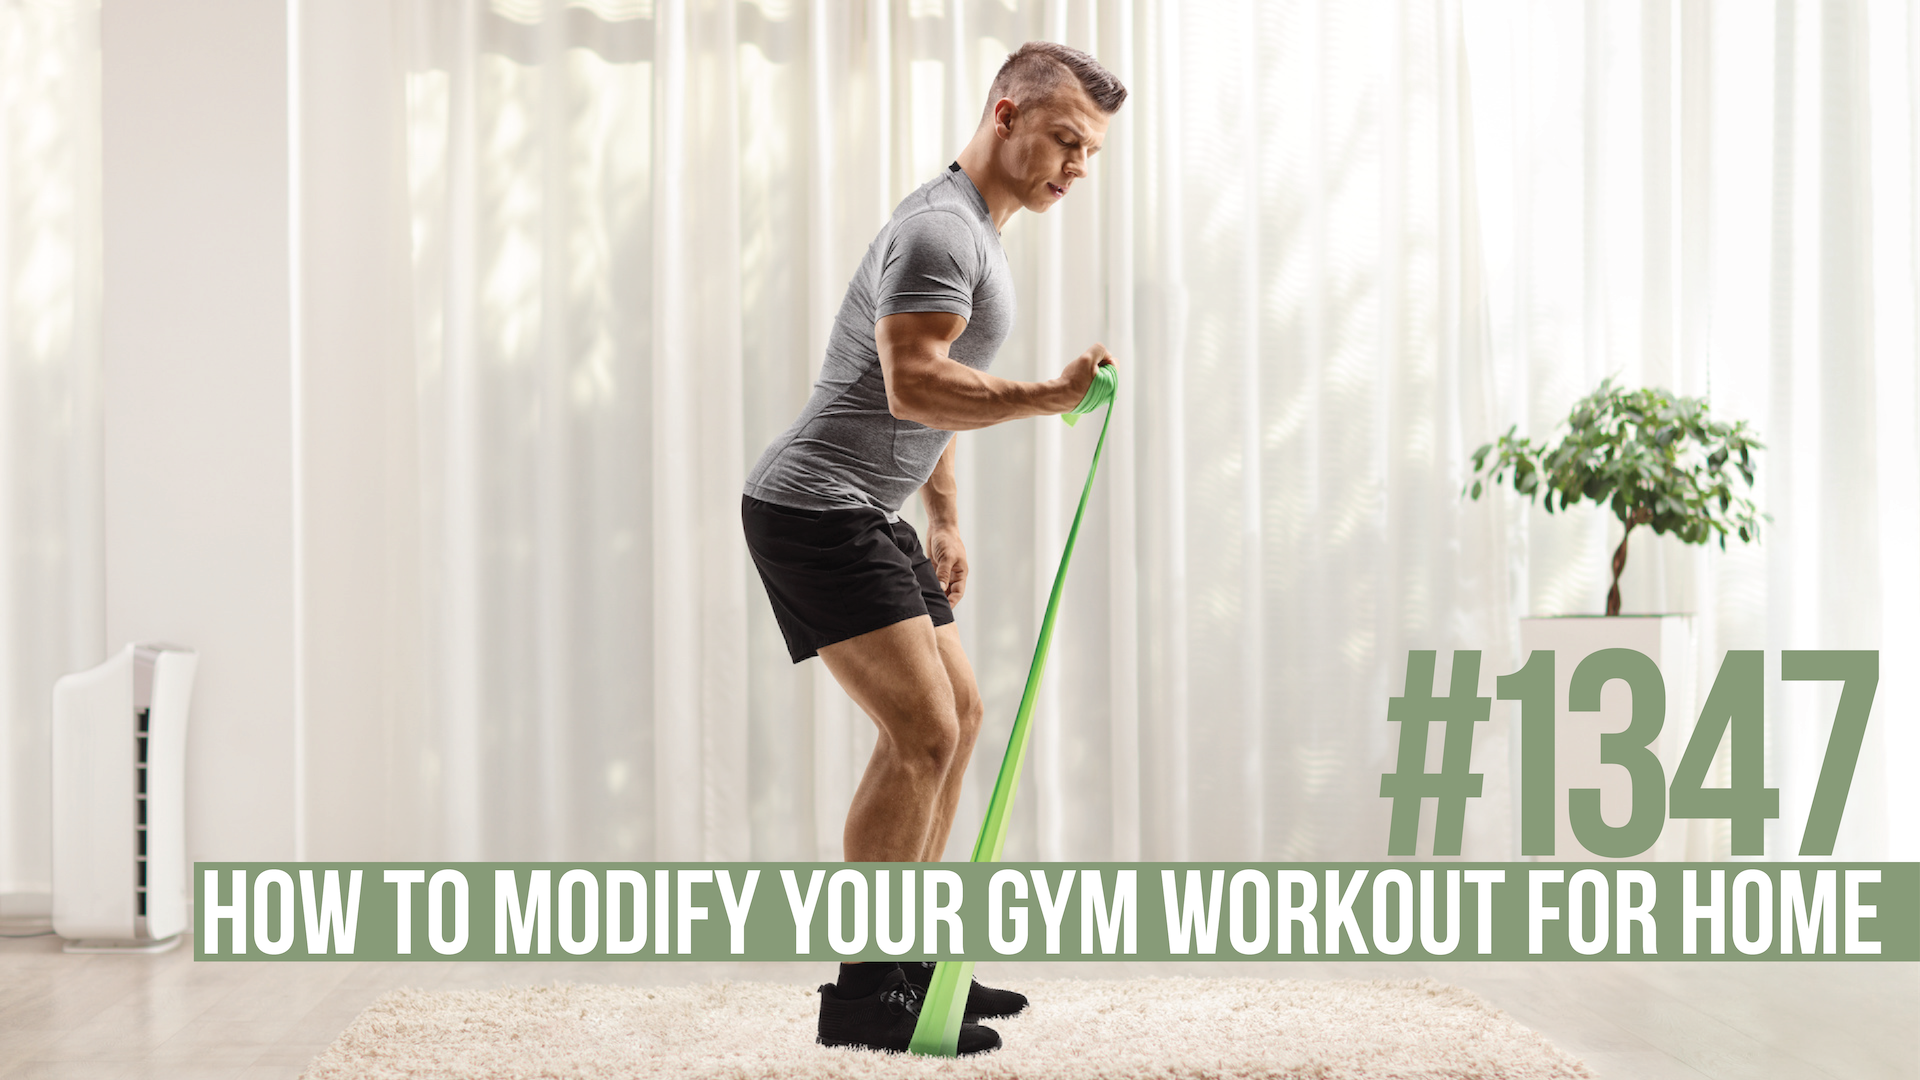 1347: How to Modify Your Gym Workout for Home